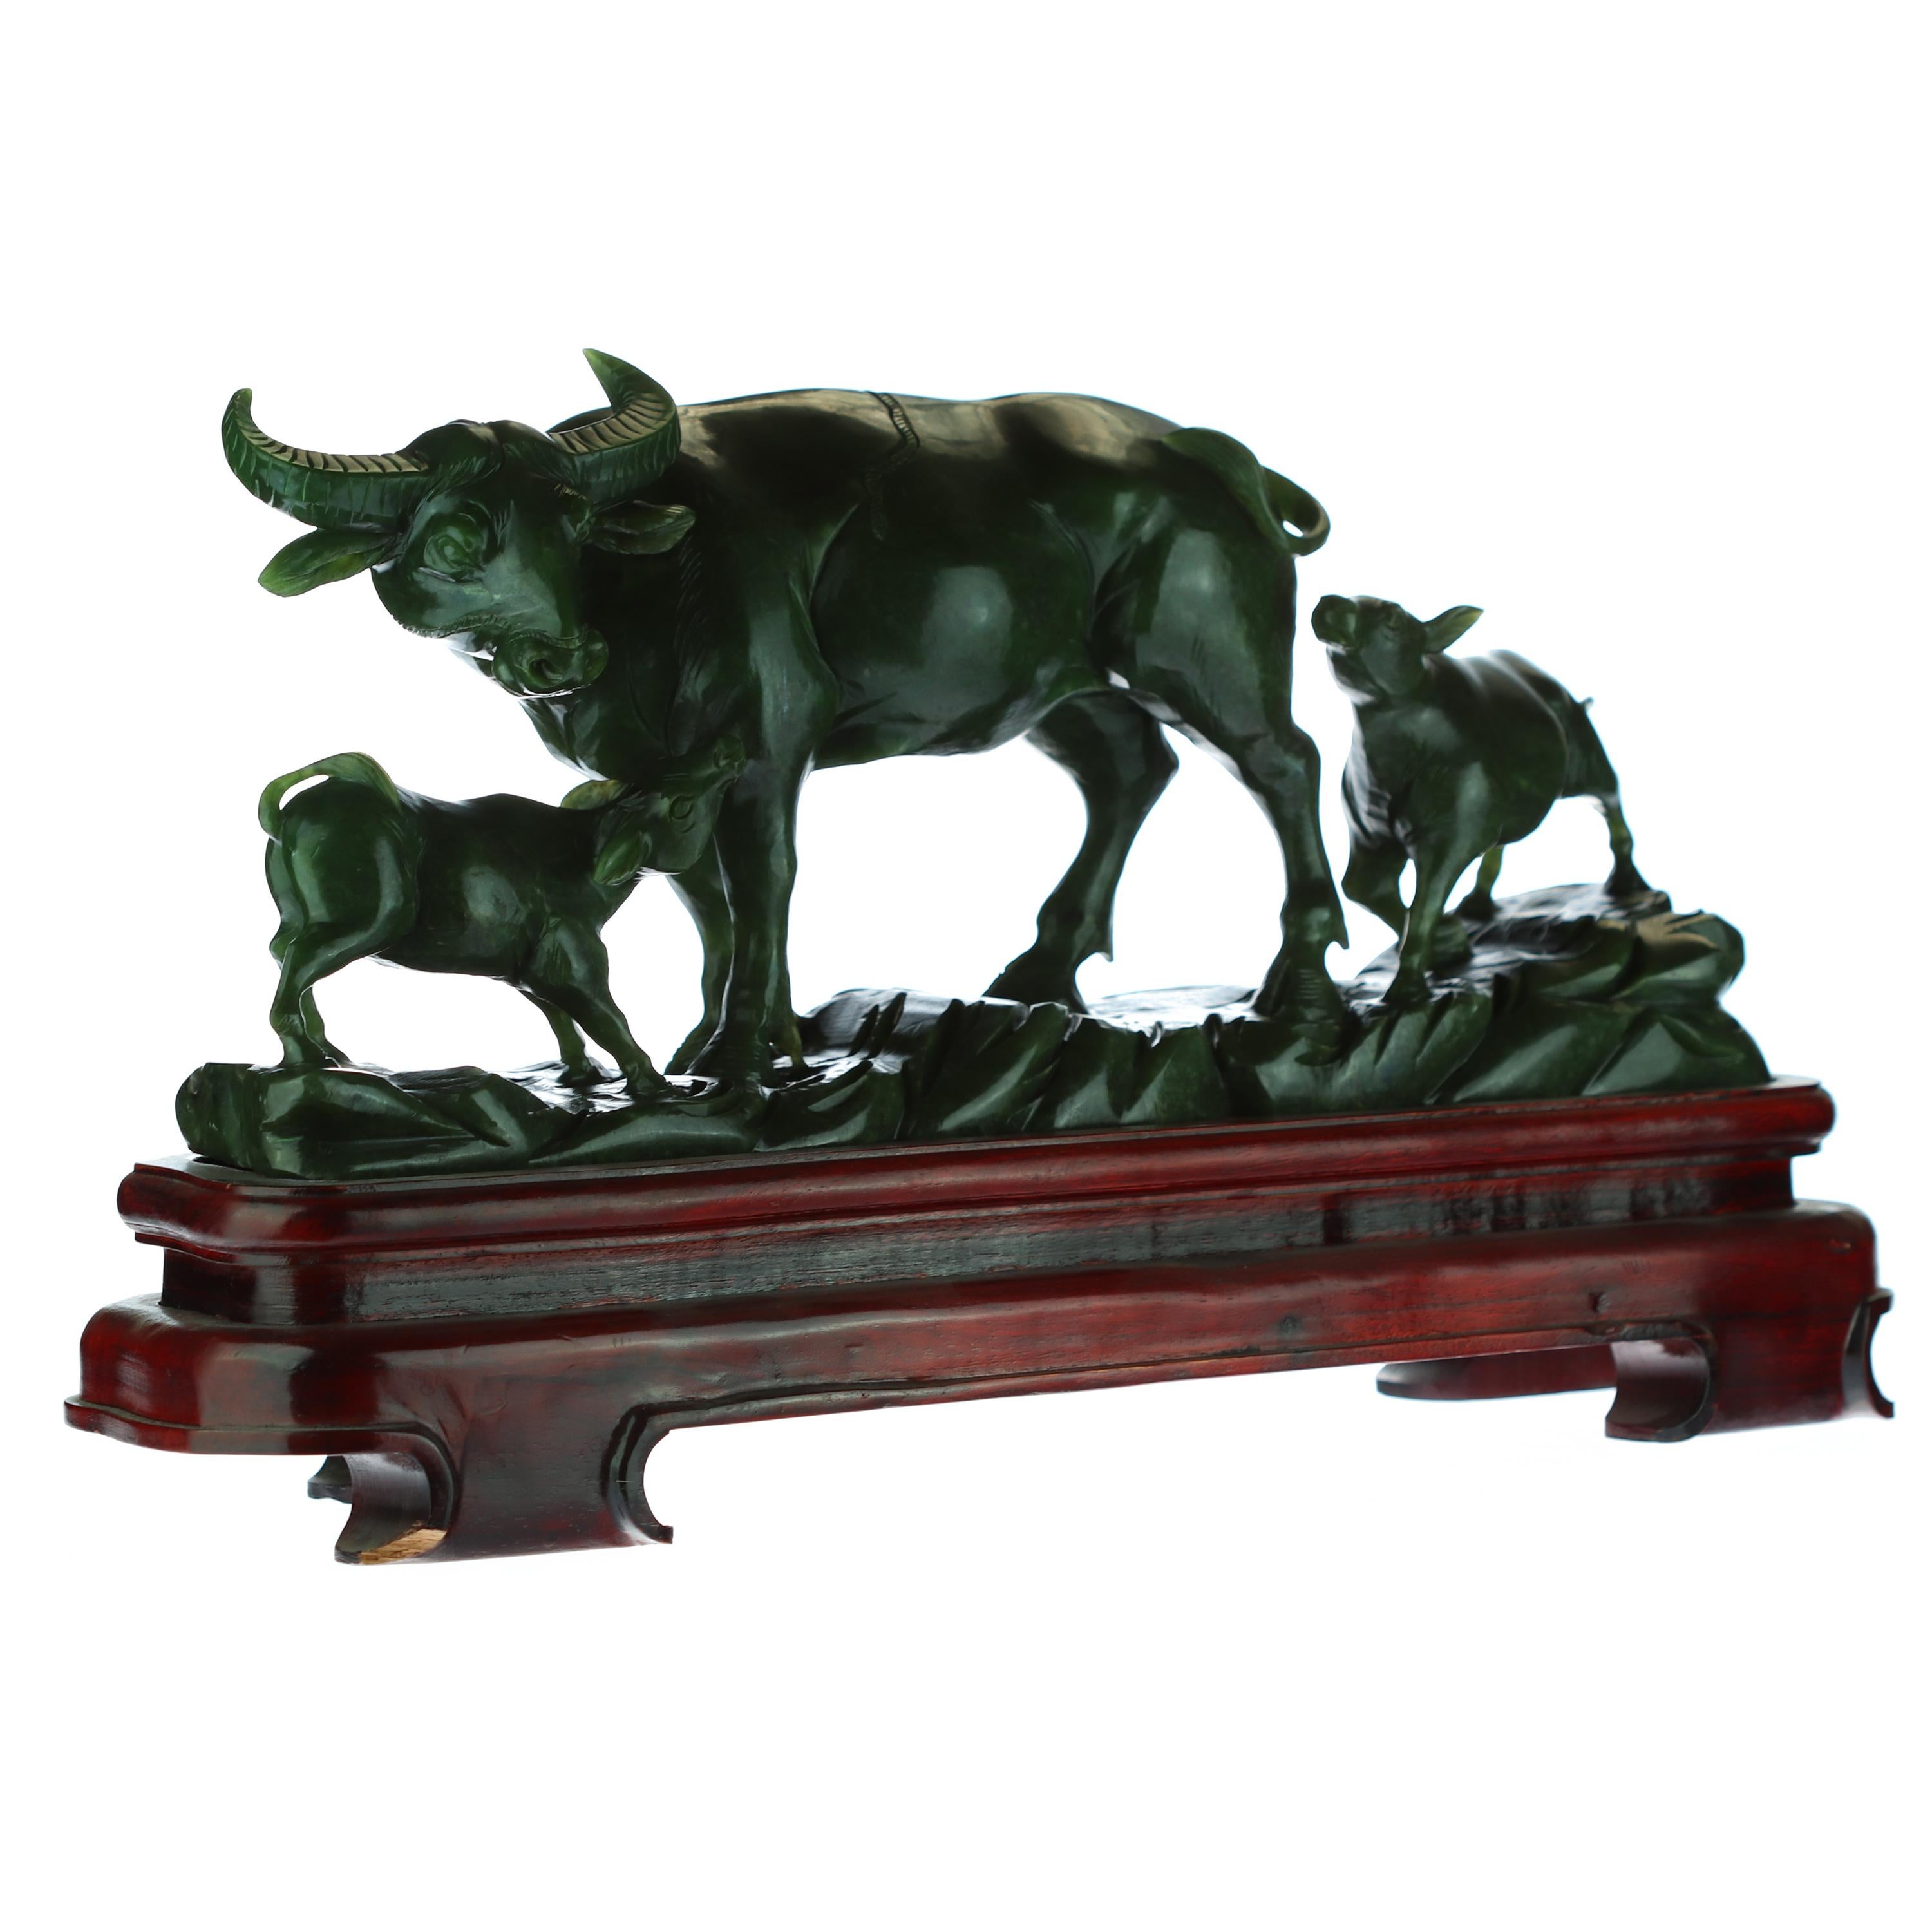 Stunning antique Chinese sculpture. Hand carved Canadian Jade that creates a unique buffalo family figurine. Full of detail and magic where the animal family enjoys nature in a pacific way. Natural colors with a vivid feeling of joy and animal